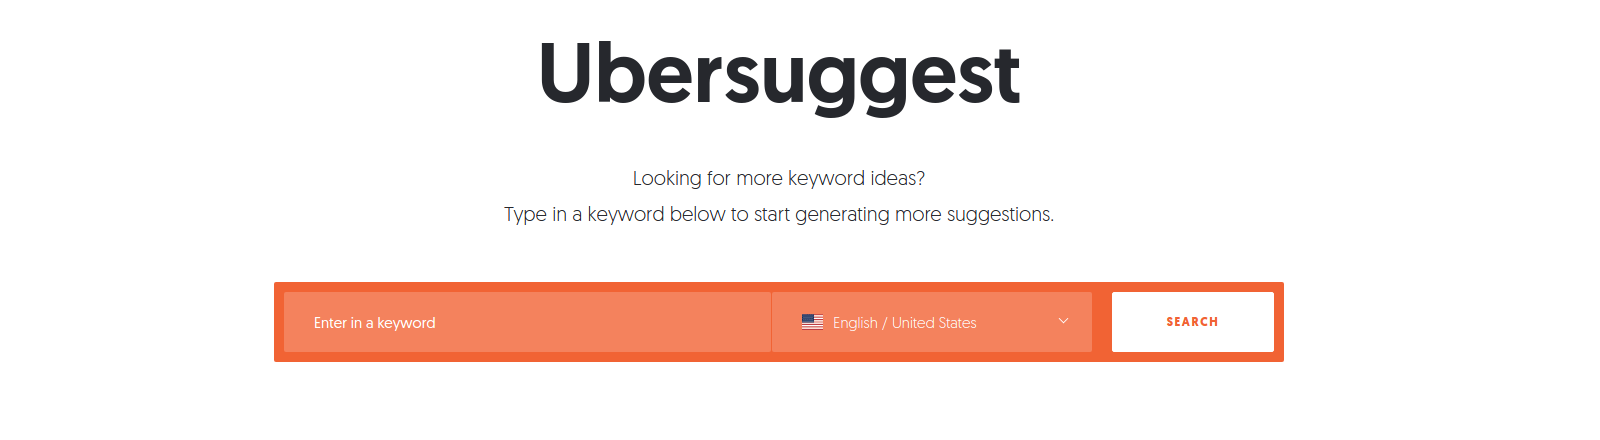 New Ubersuggest Keyword Research Online 2018 And 2019